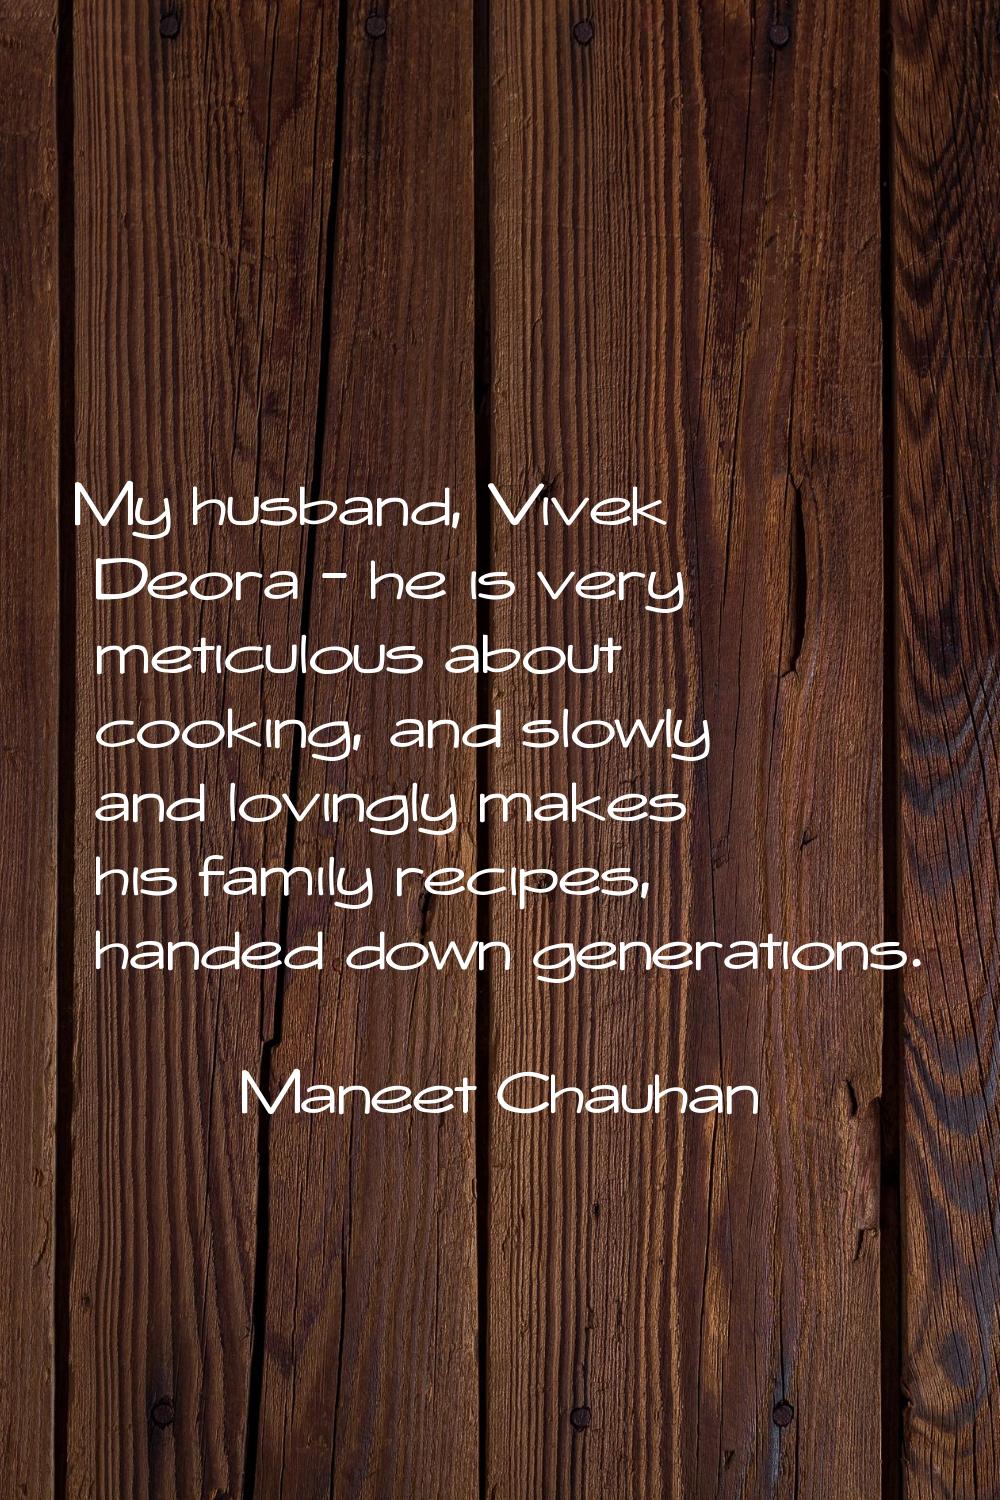 My husband, Vivek Deora - he is very meticulous about cooking, and slowly and lovingly makes his fa